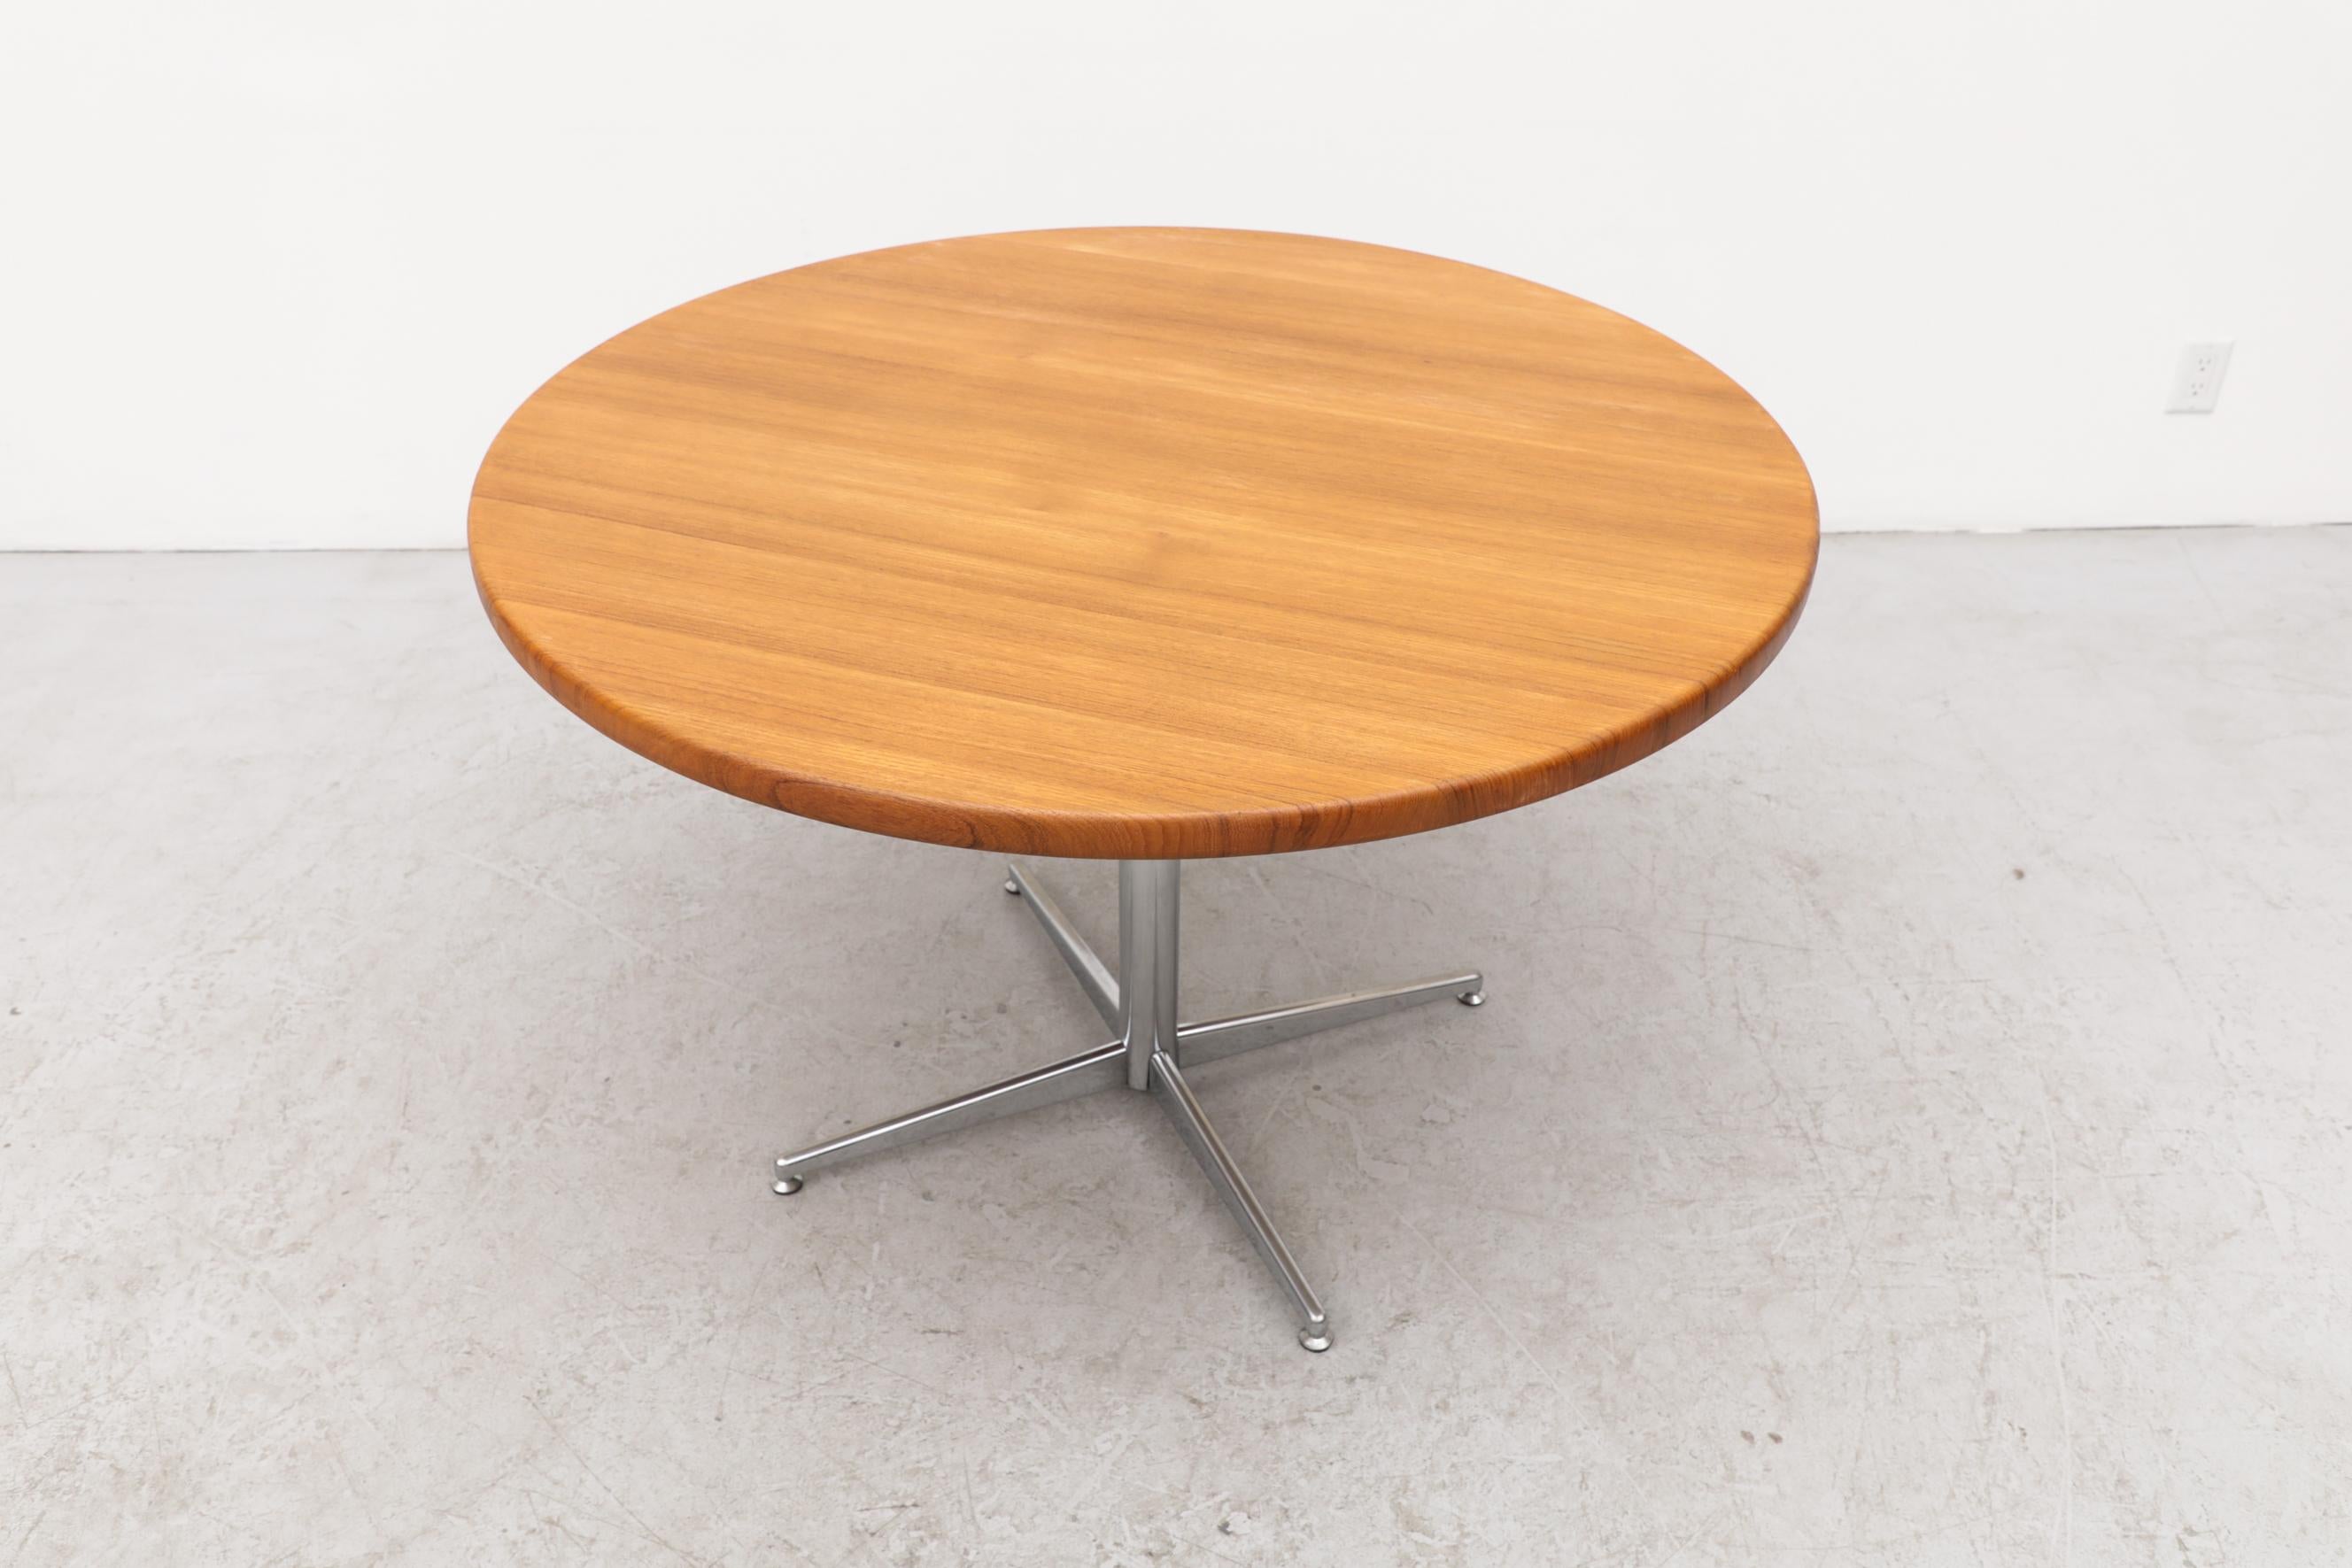 Late 20th Century Herman Miller Inspired Solid Wood Topped Mid-Century Pedestal Table